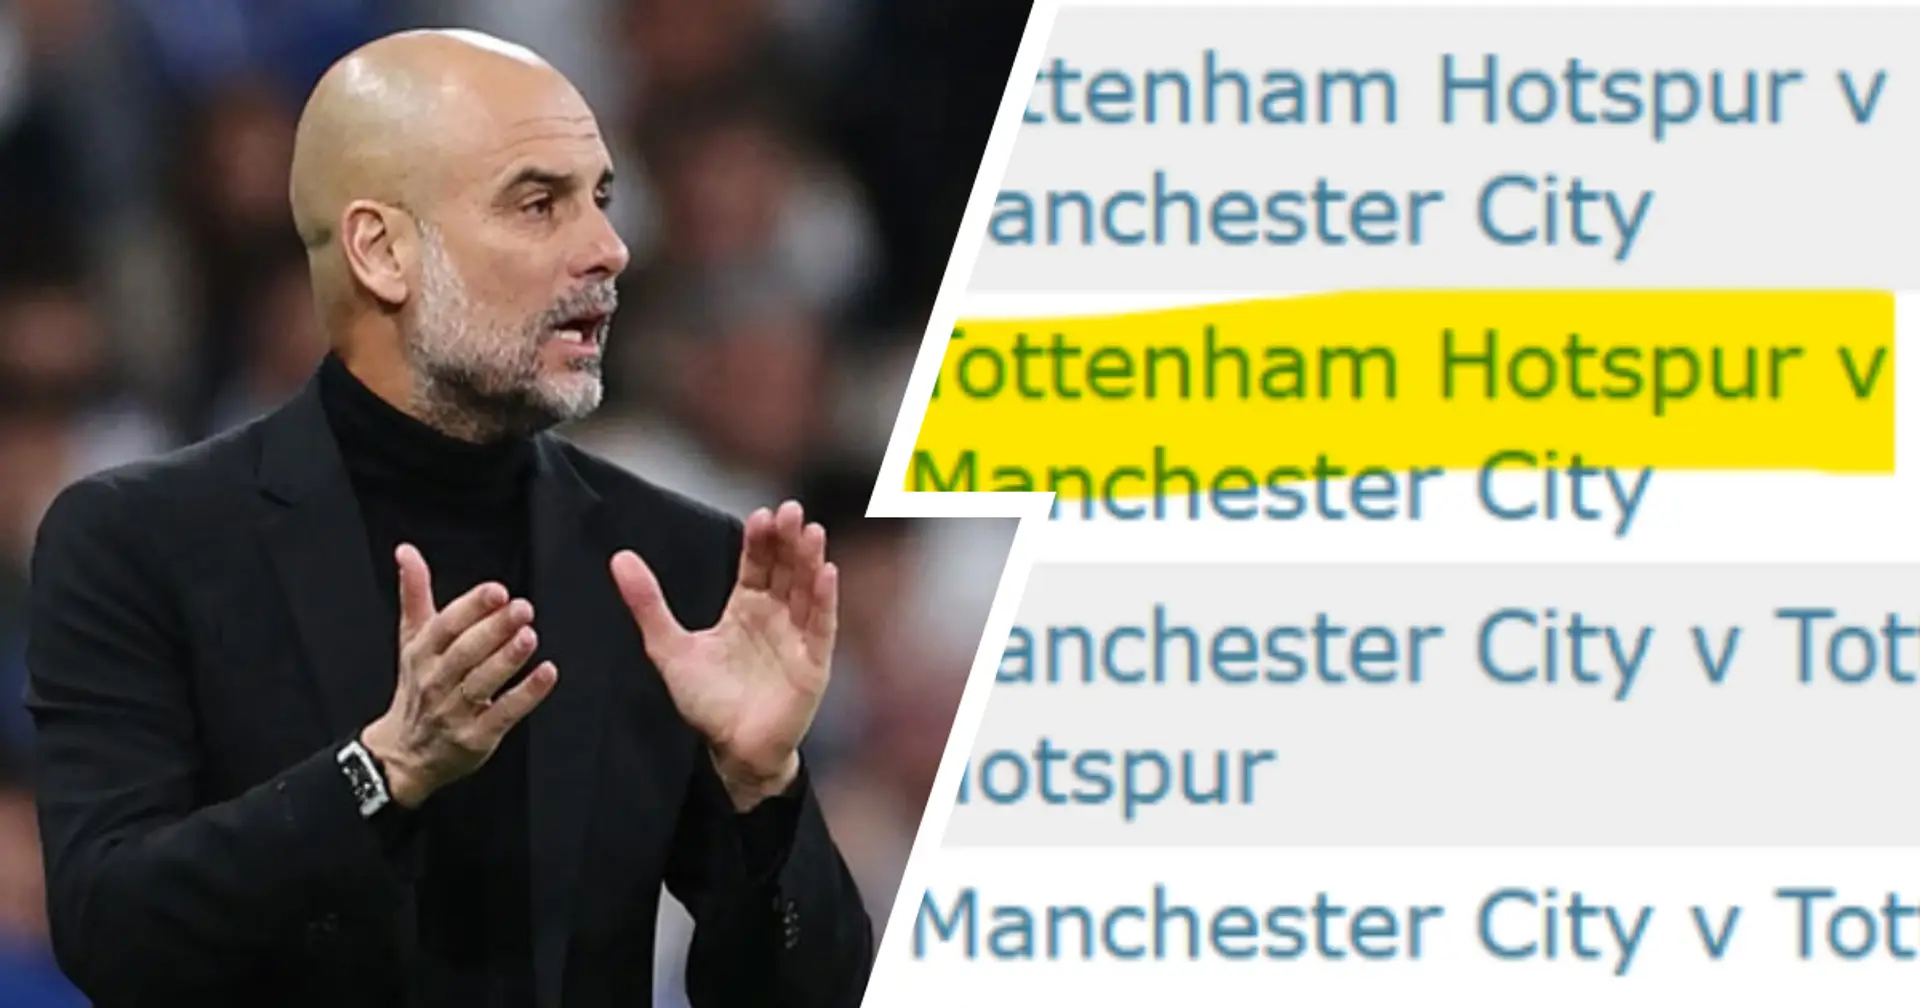 One banana skin for Man City in 4 remaining Premier League games — explained in 30 seconds